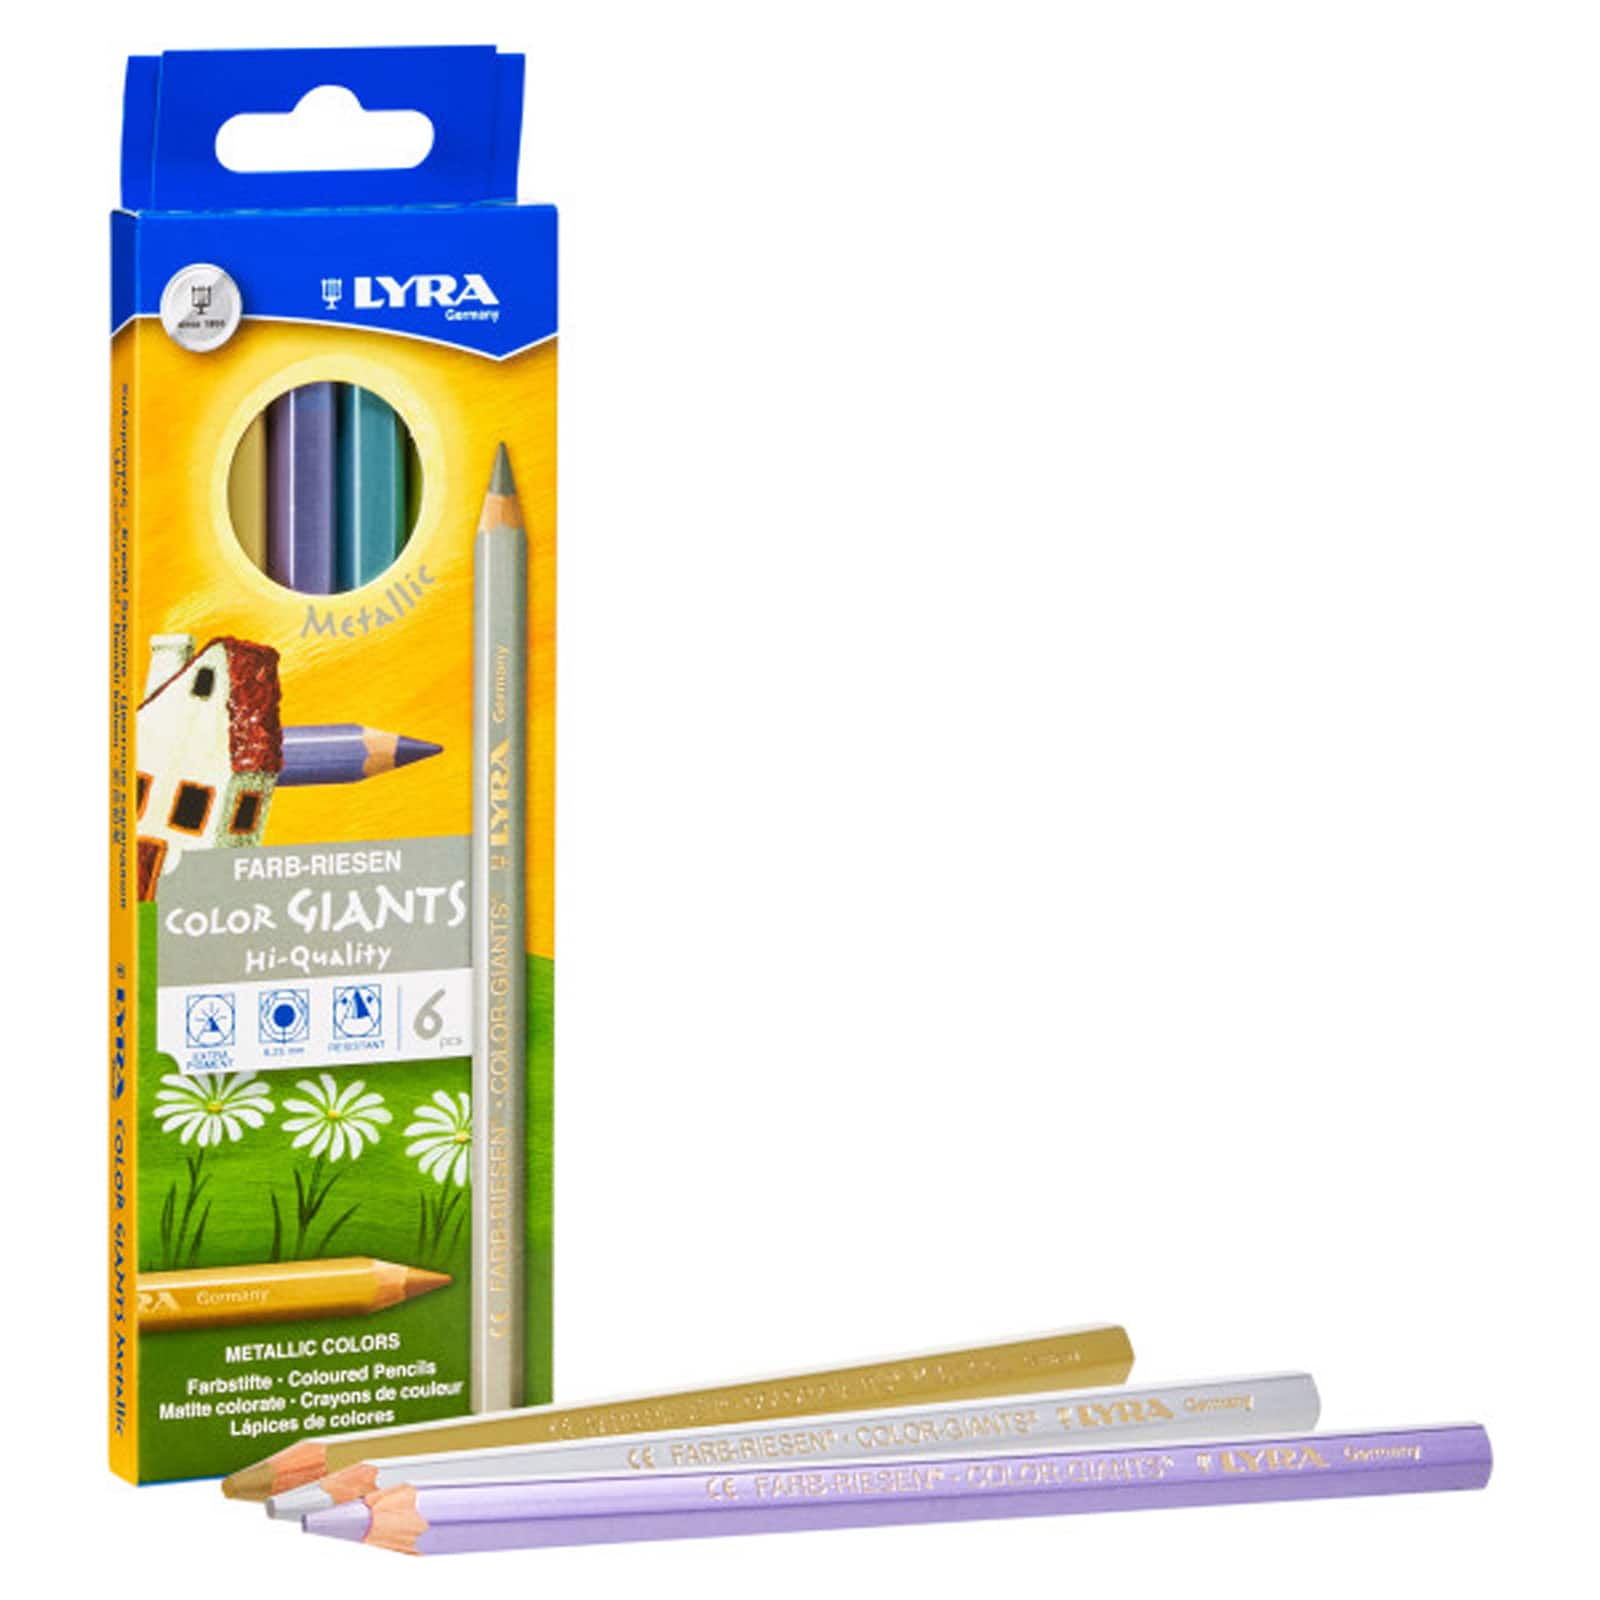 Lyra Metallic Color Giant Colored Pencils, 2 Packs of 6